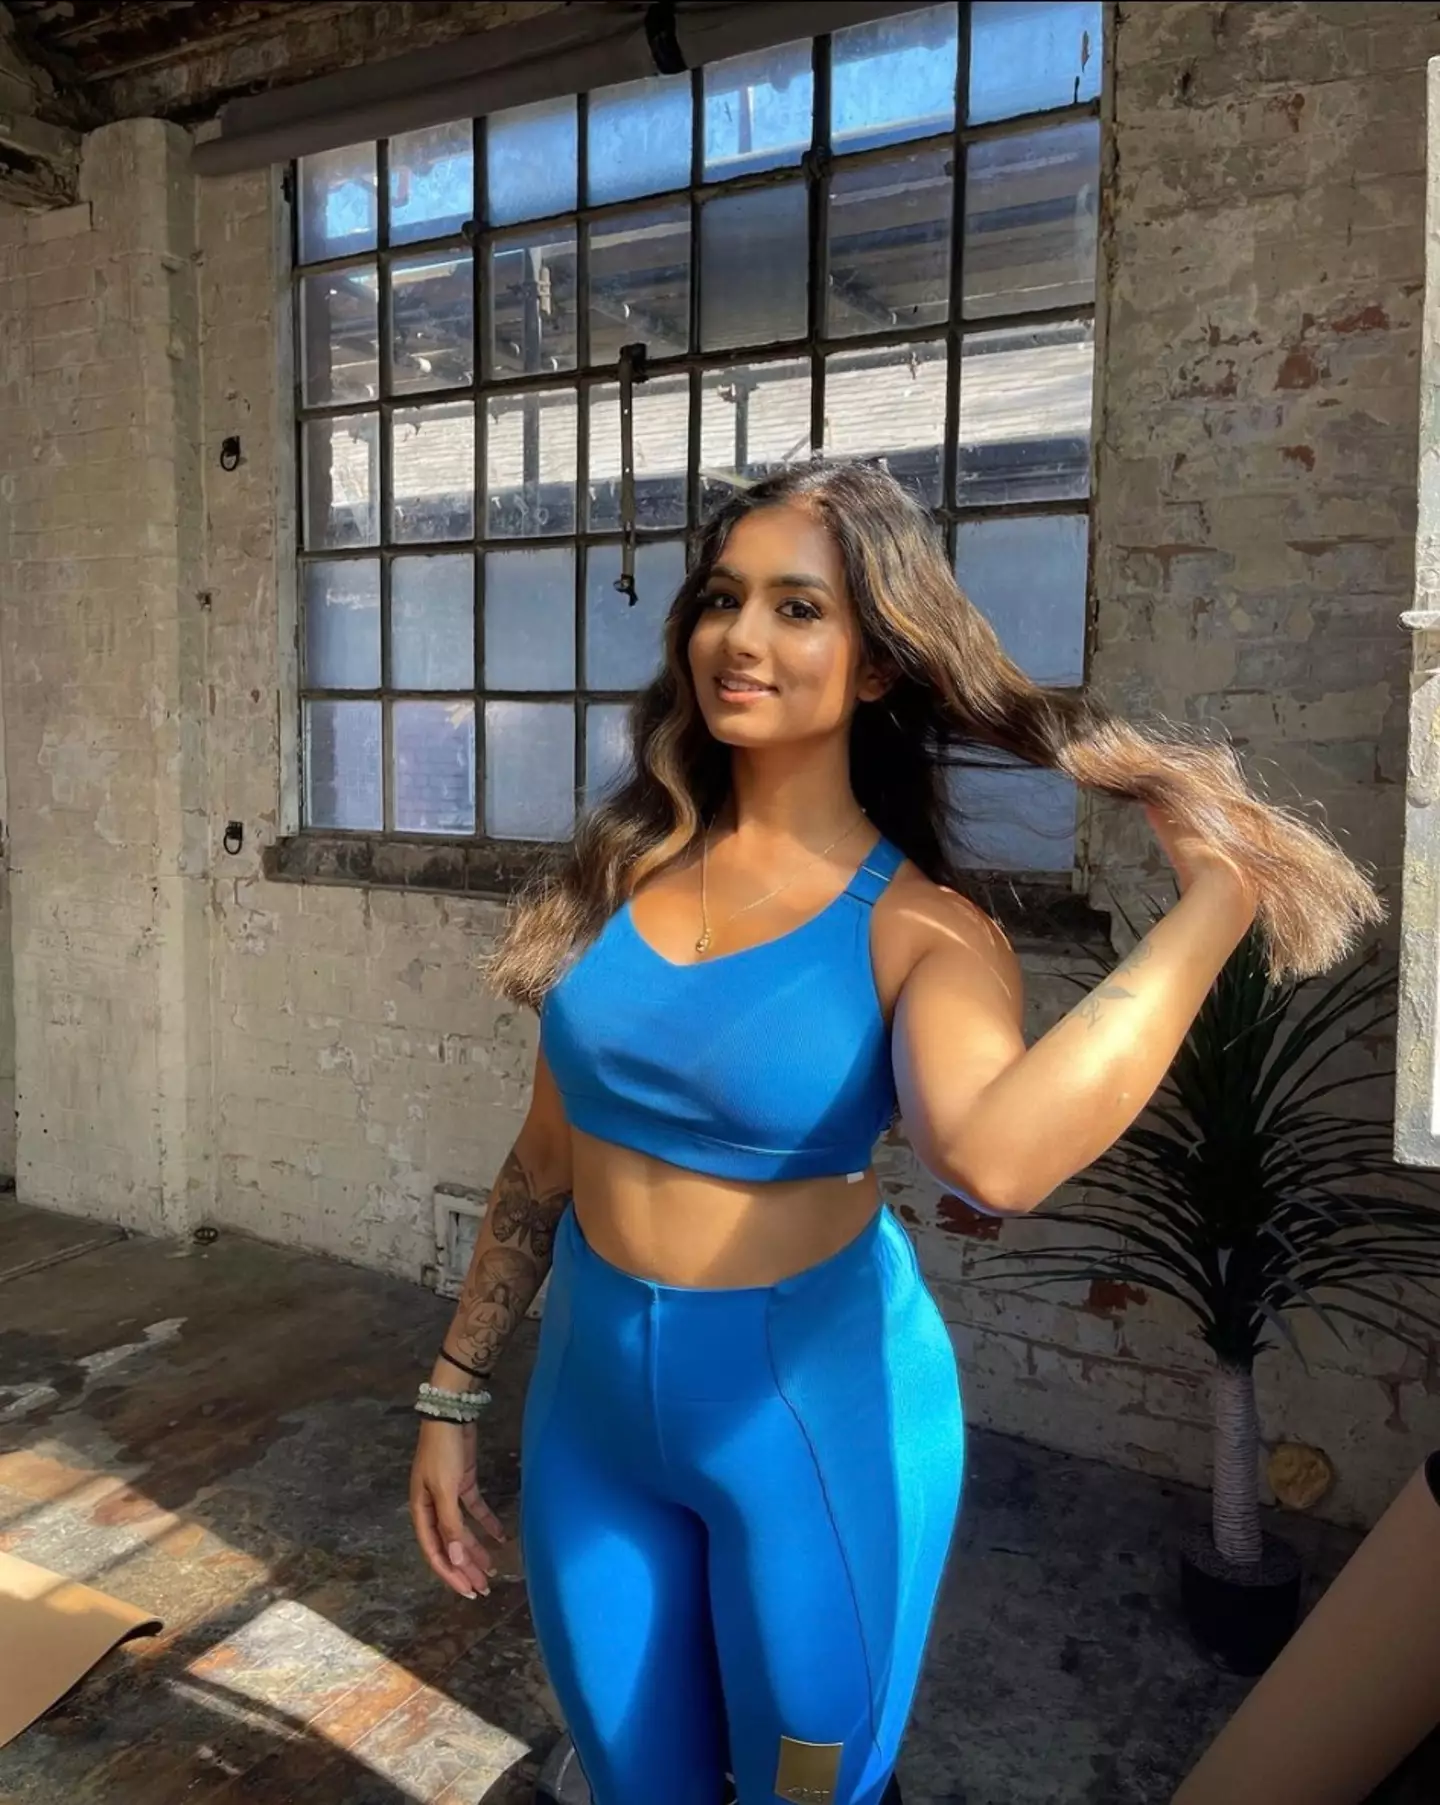 Keisha opened up about her personal decision to return to the gym after her body recovered.